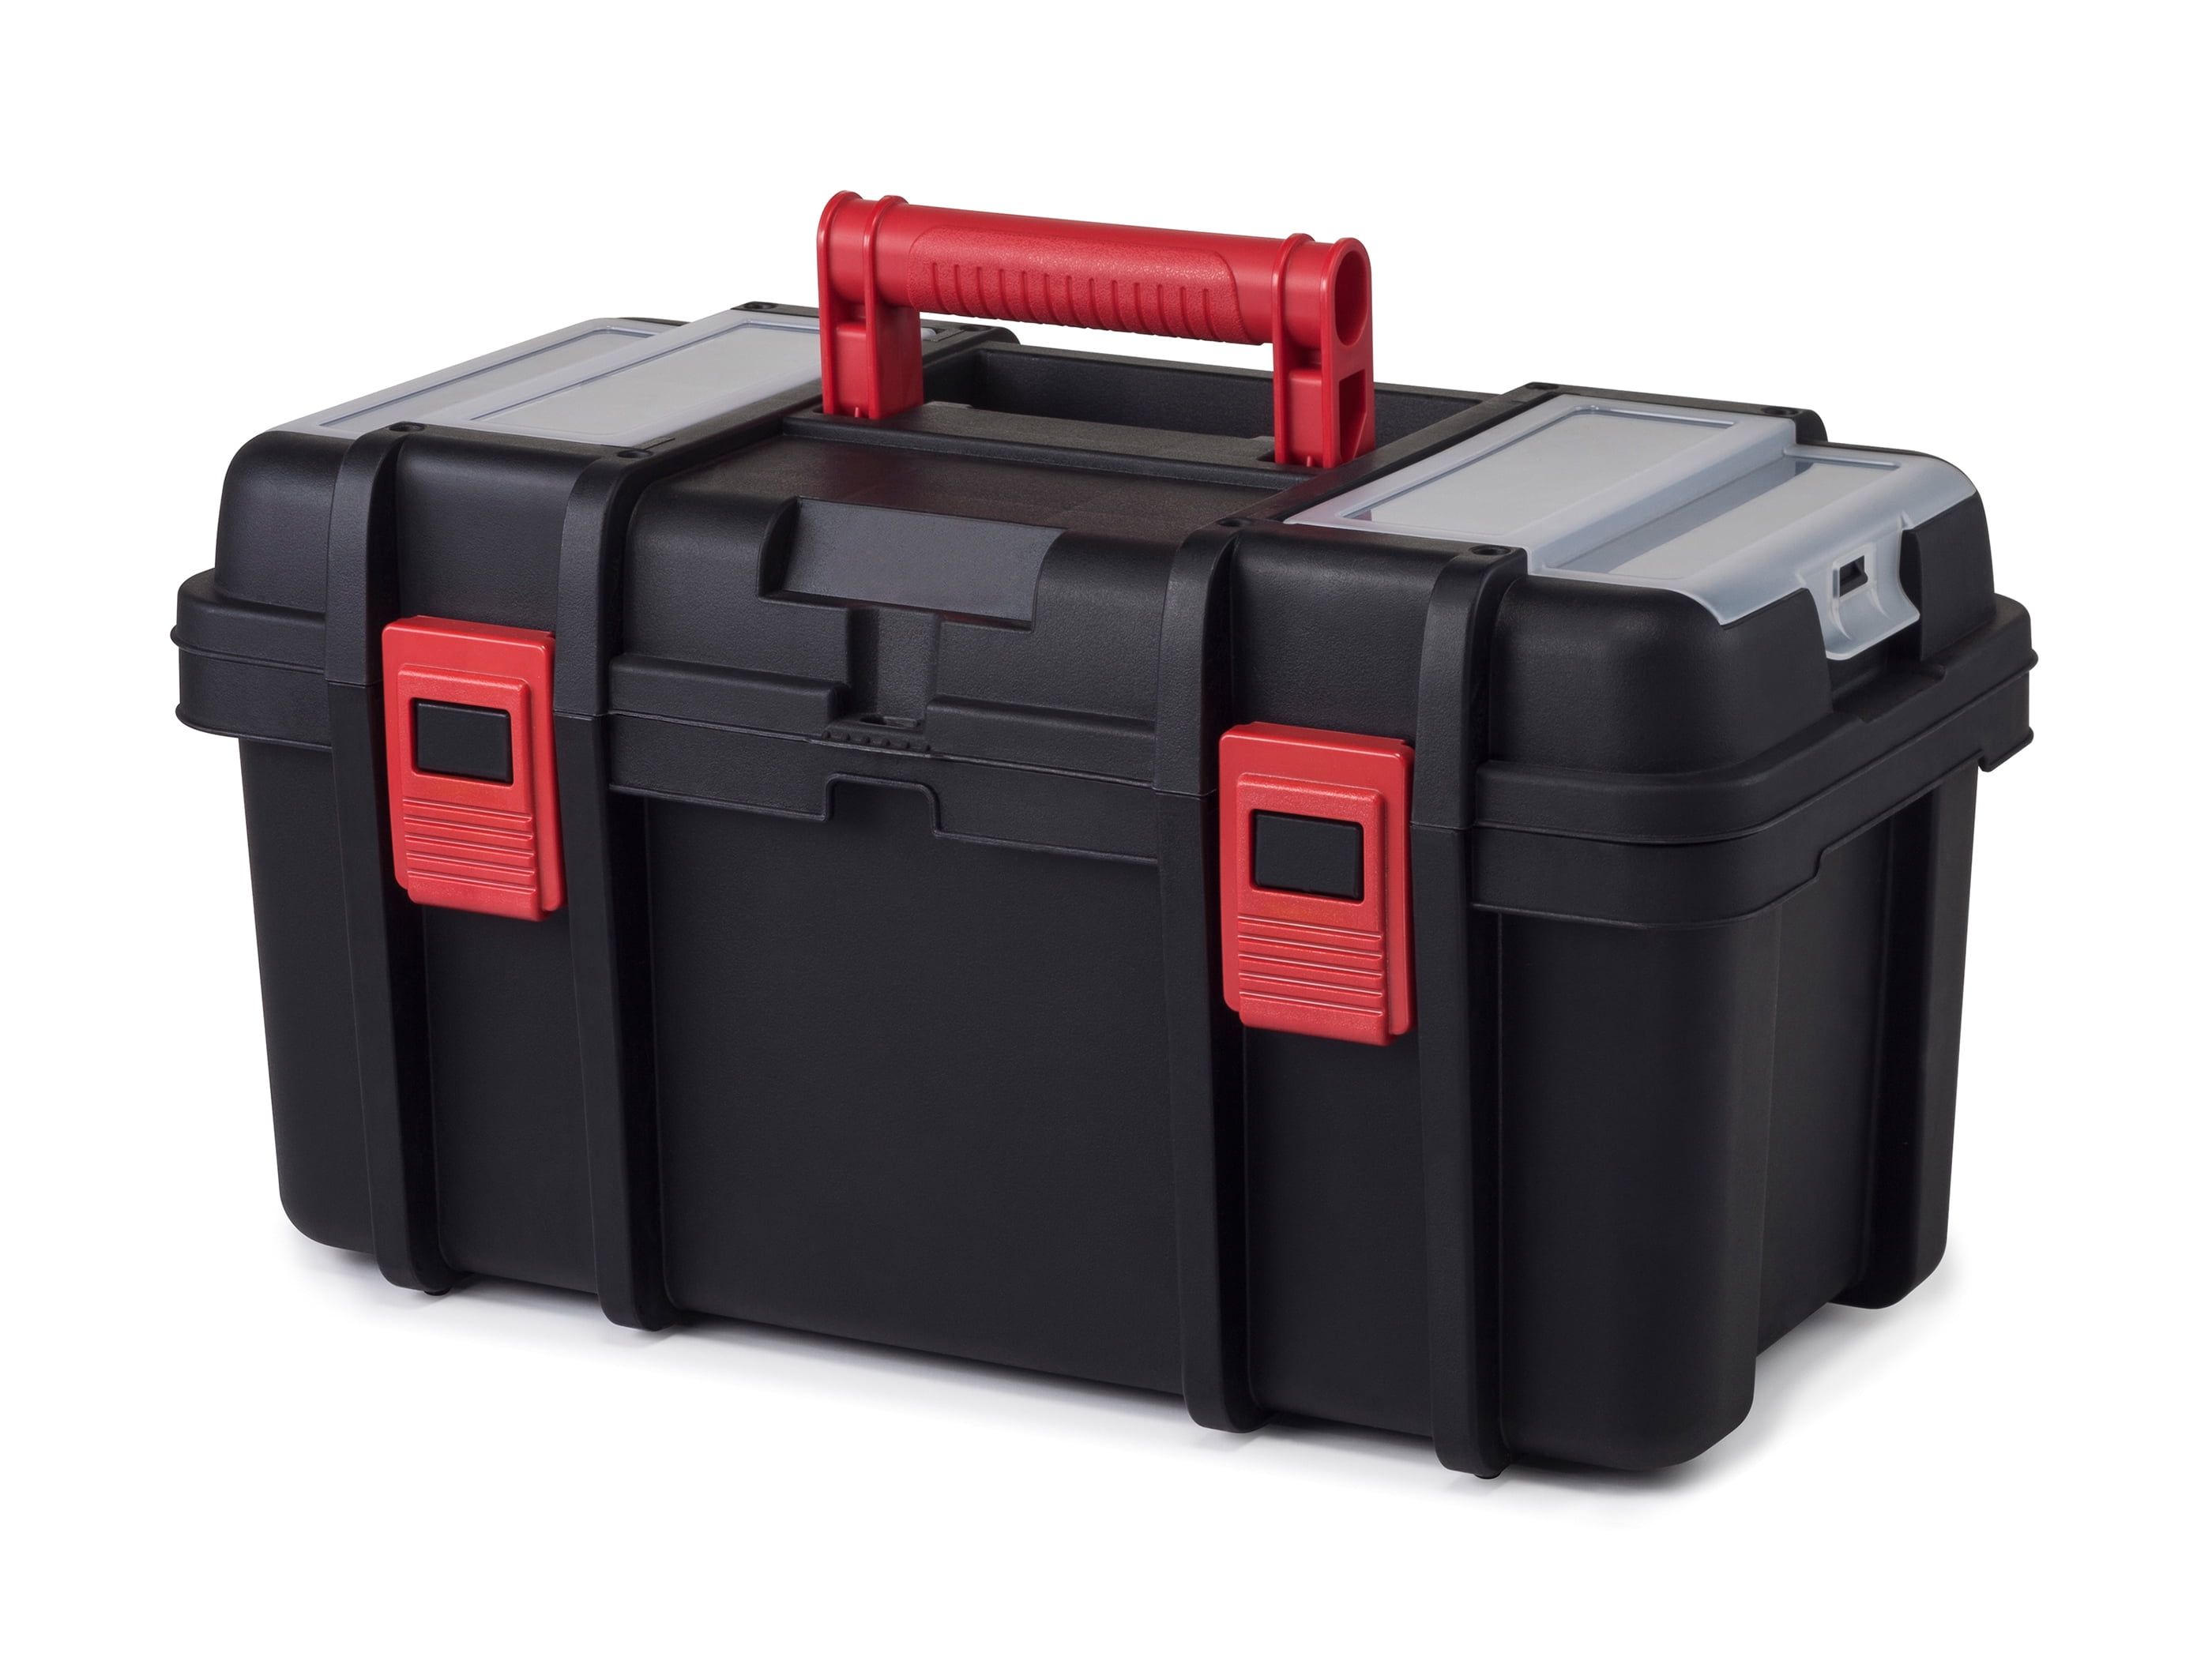 Details about   Hyper Tough 19-Inch Toolbox Plastic Tool and Hardware Storage Black 